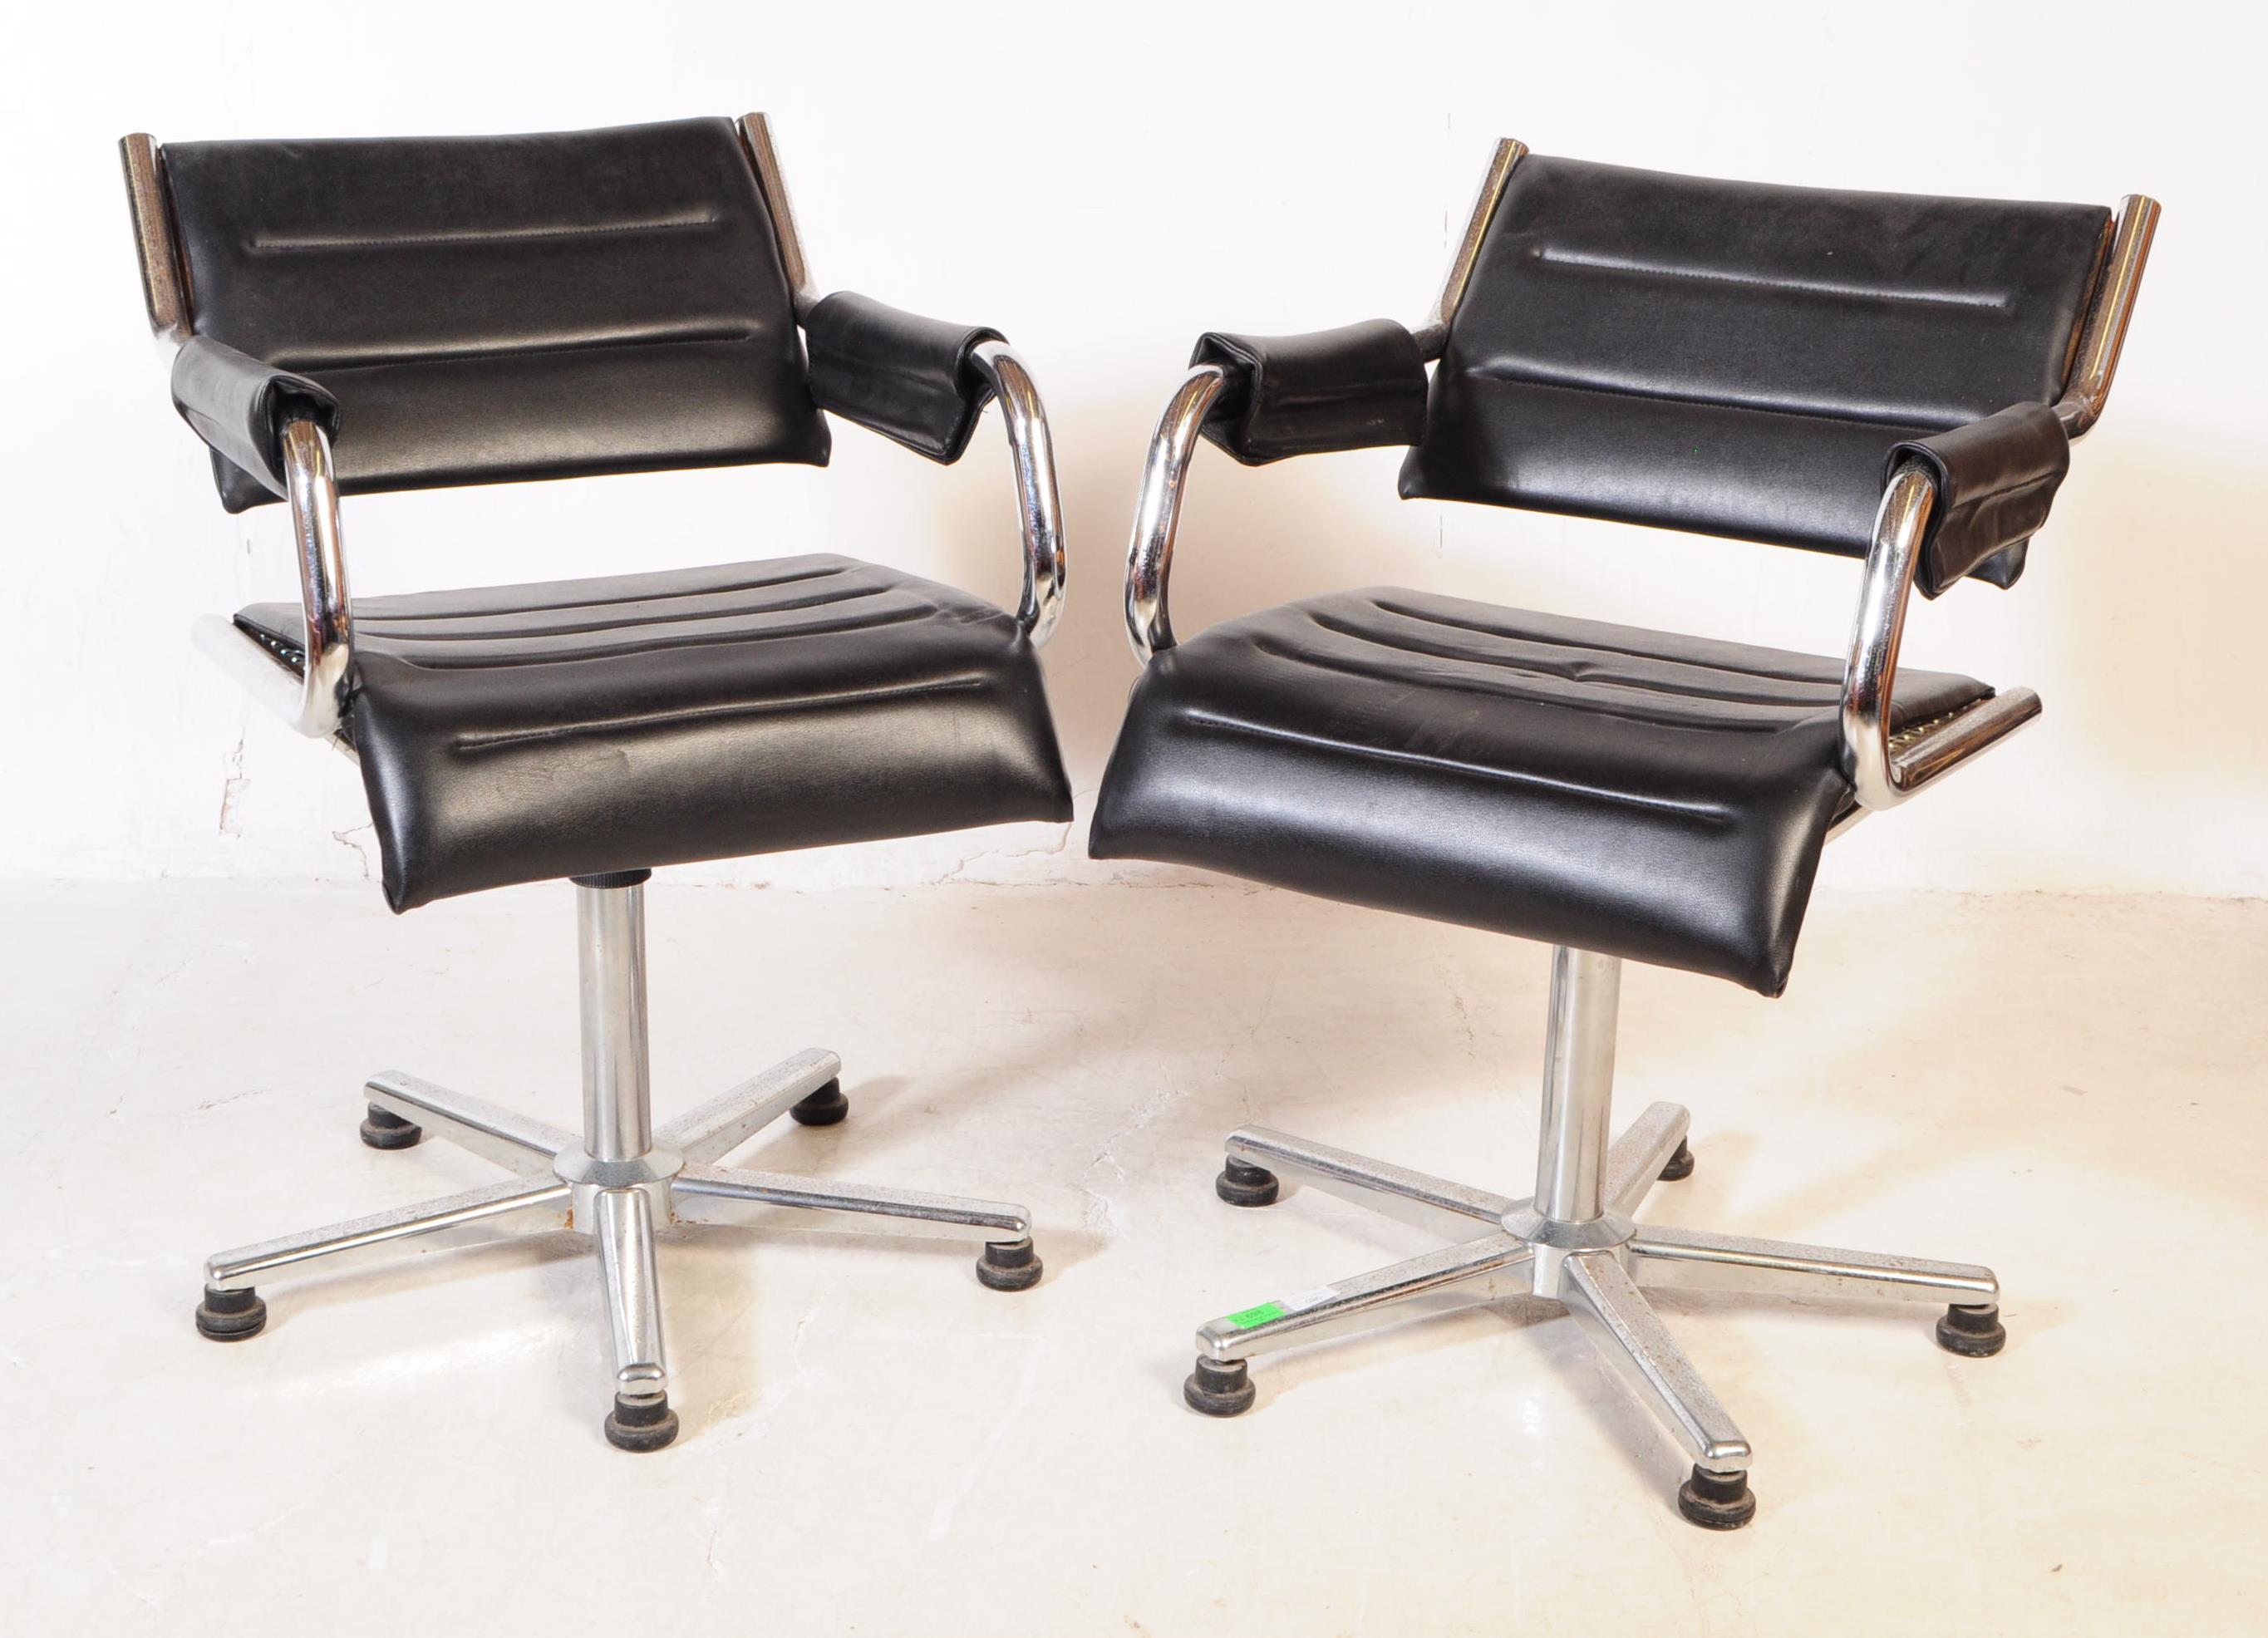 PAIR OF VINTAGE 20TH CENTURY CHROME OFFICE DESK CHAIRS